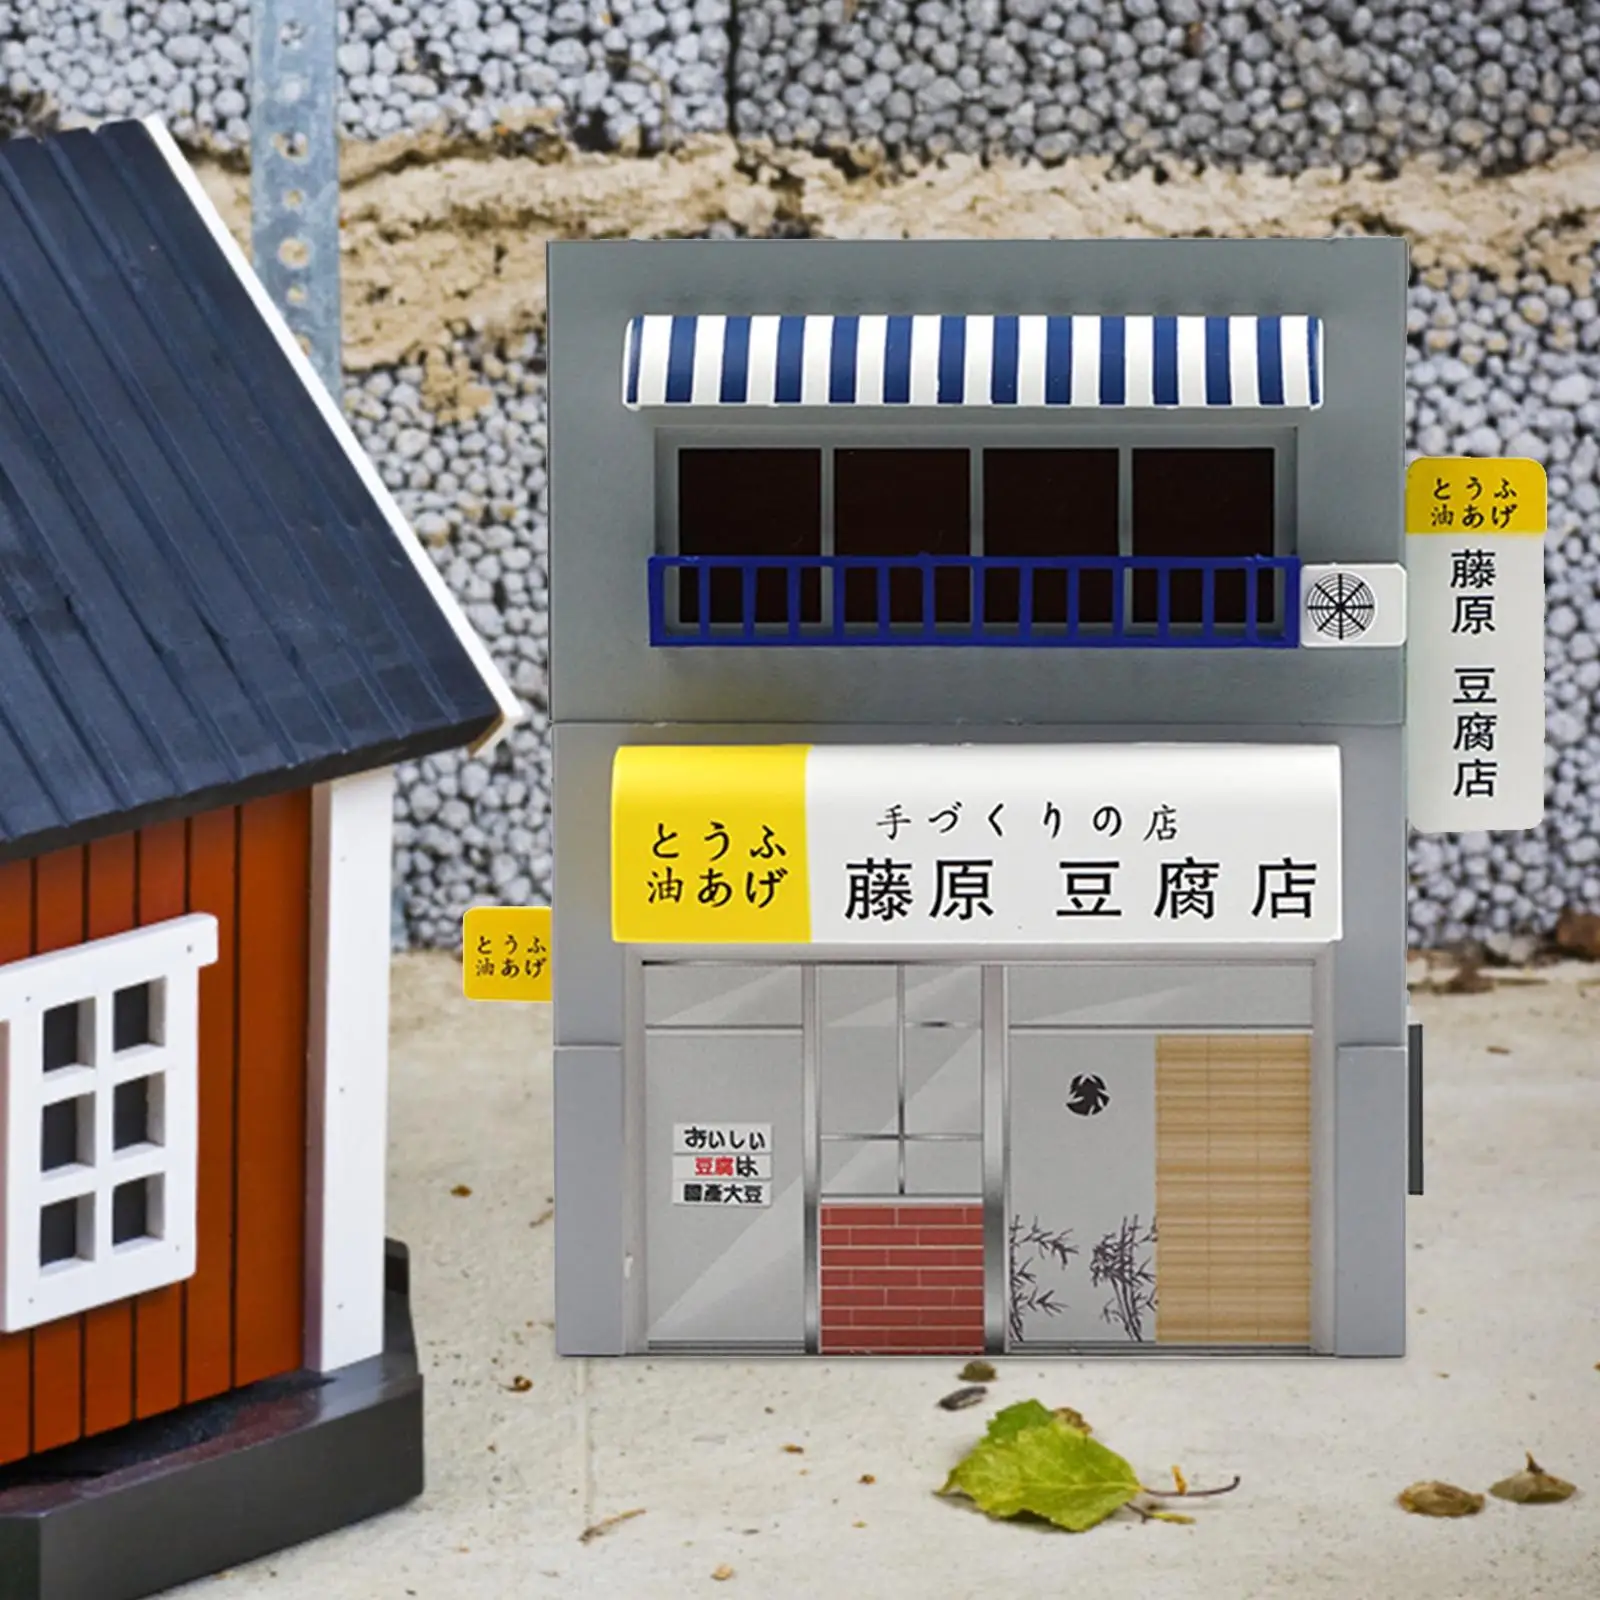 1/64 Tofu Shop Diorama Model S Gauge Sand Table Micro Landscape Collection Desktop Layout Scenery Store DIY Projects Decor